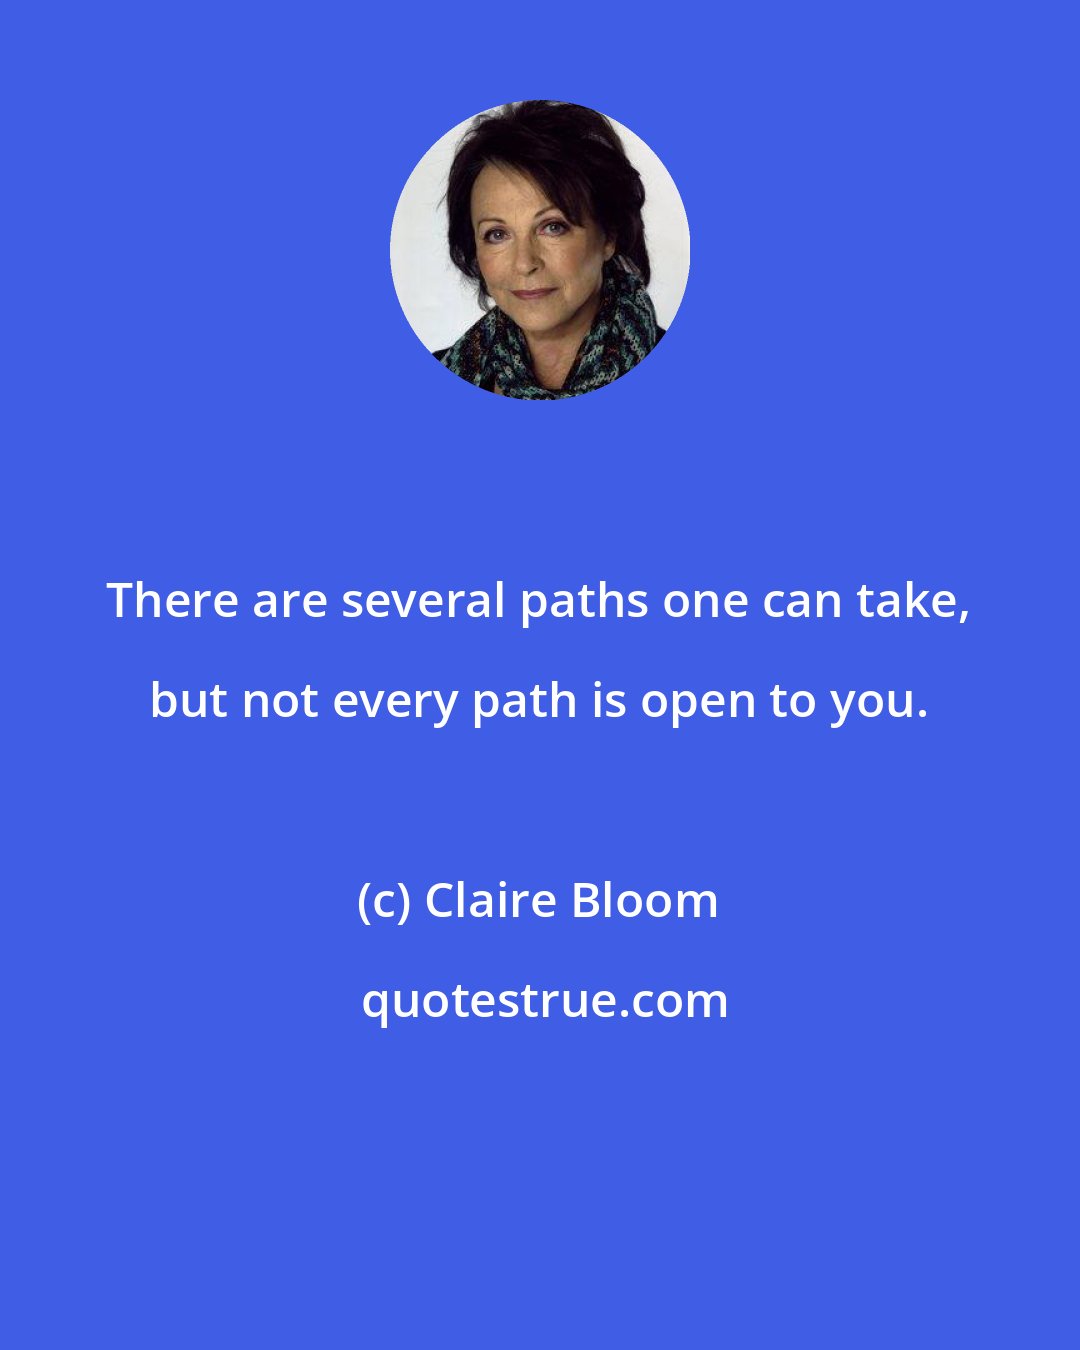 Claire Bloom: There are several paths one can take, but not every path is open to you.